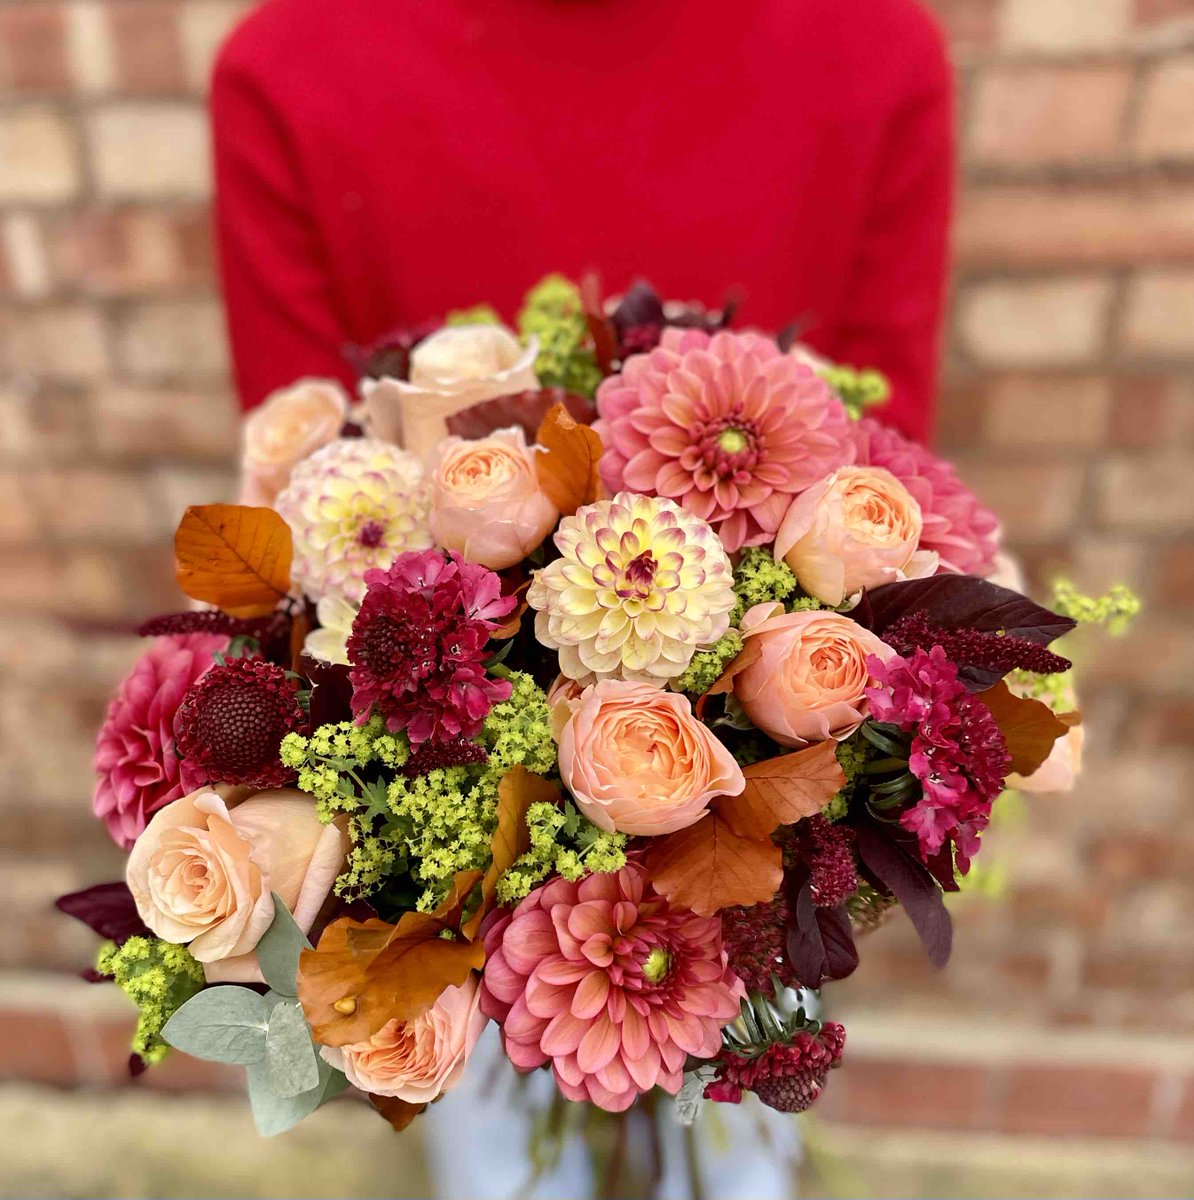 A vibrant display of autumn's beauty, featuring a kaleidoscope of colours that captures the essence of the season's transition.

#pulbrookandgould #autumnflowers